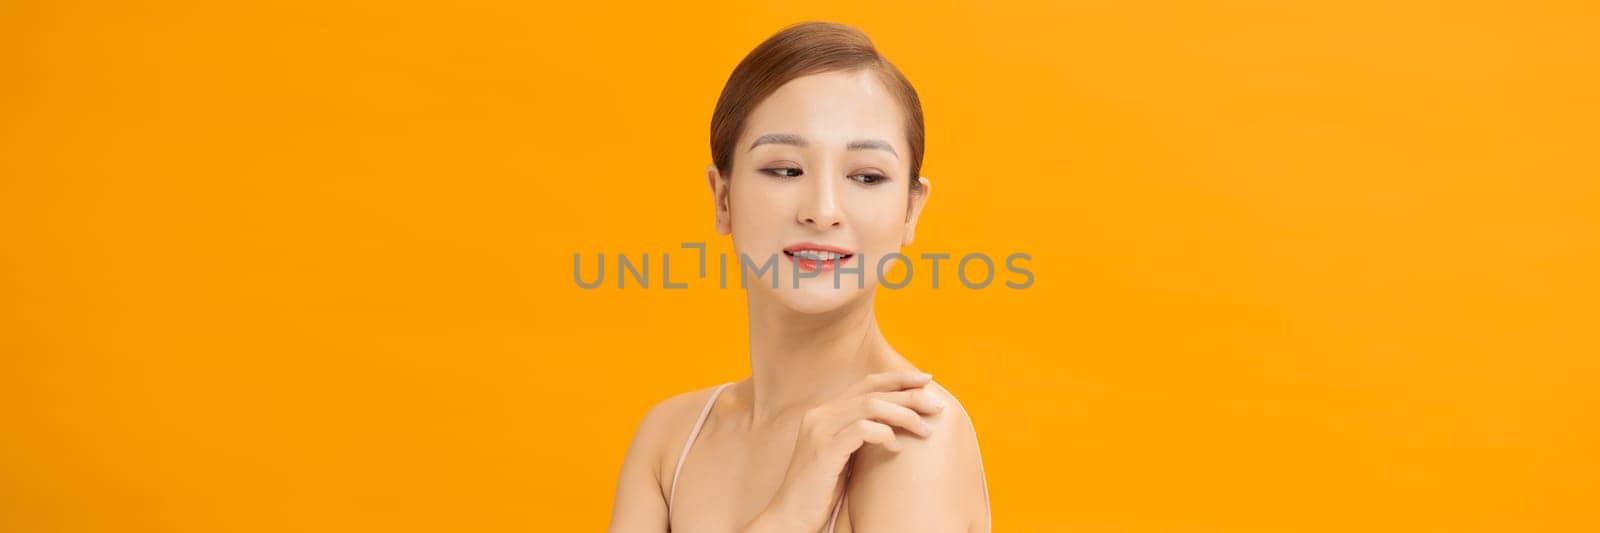 Youthful smiling Asian woman isolated on yellow banner background for beauty and skin care concepts